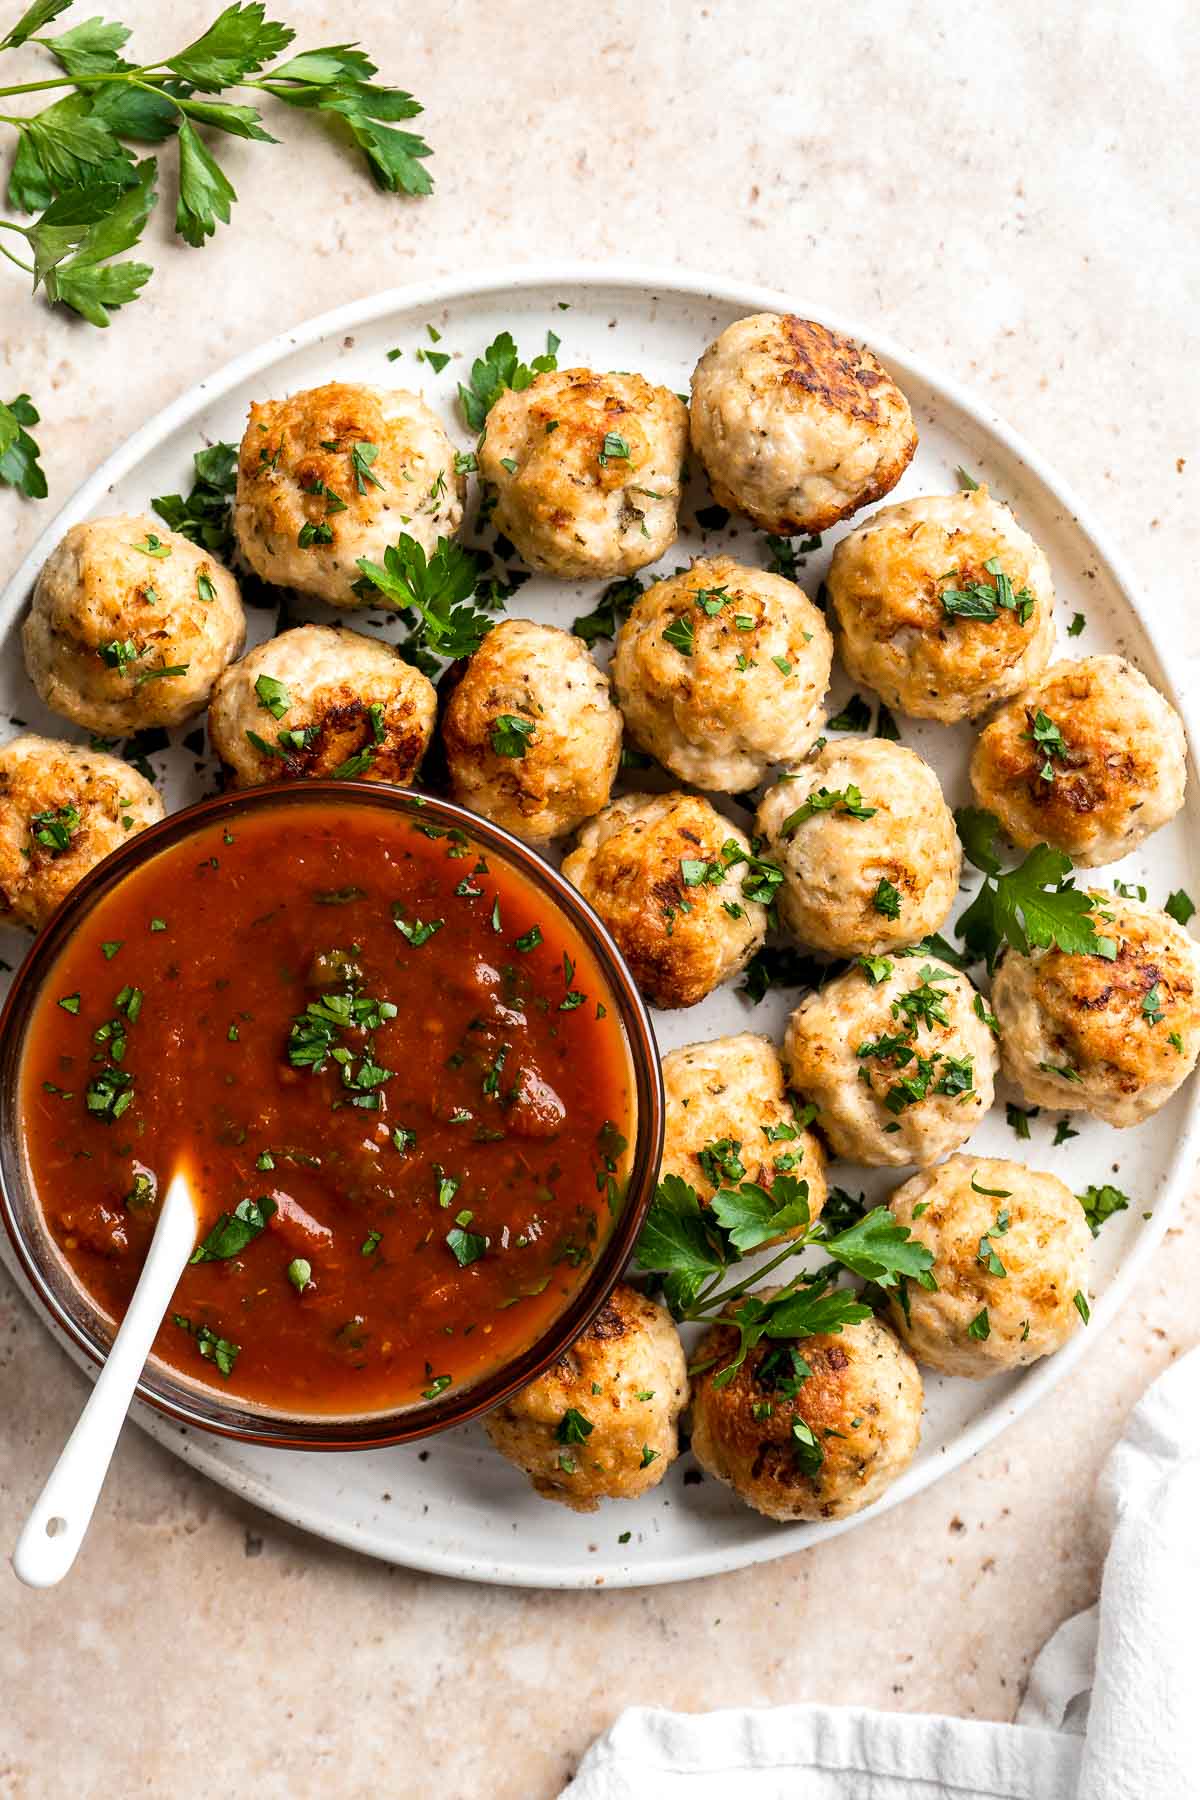 Baked Chicken Meatballs are tender, juicy, and flavorful (no dry meatballs here!). Made in just 45 minutes using simple ingredients. So quick and easy! | aheadofthyme.com